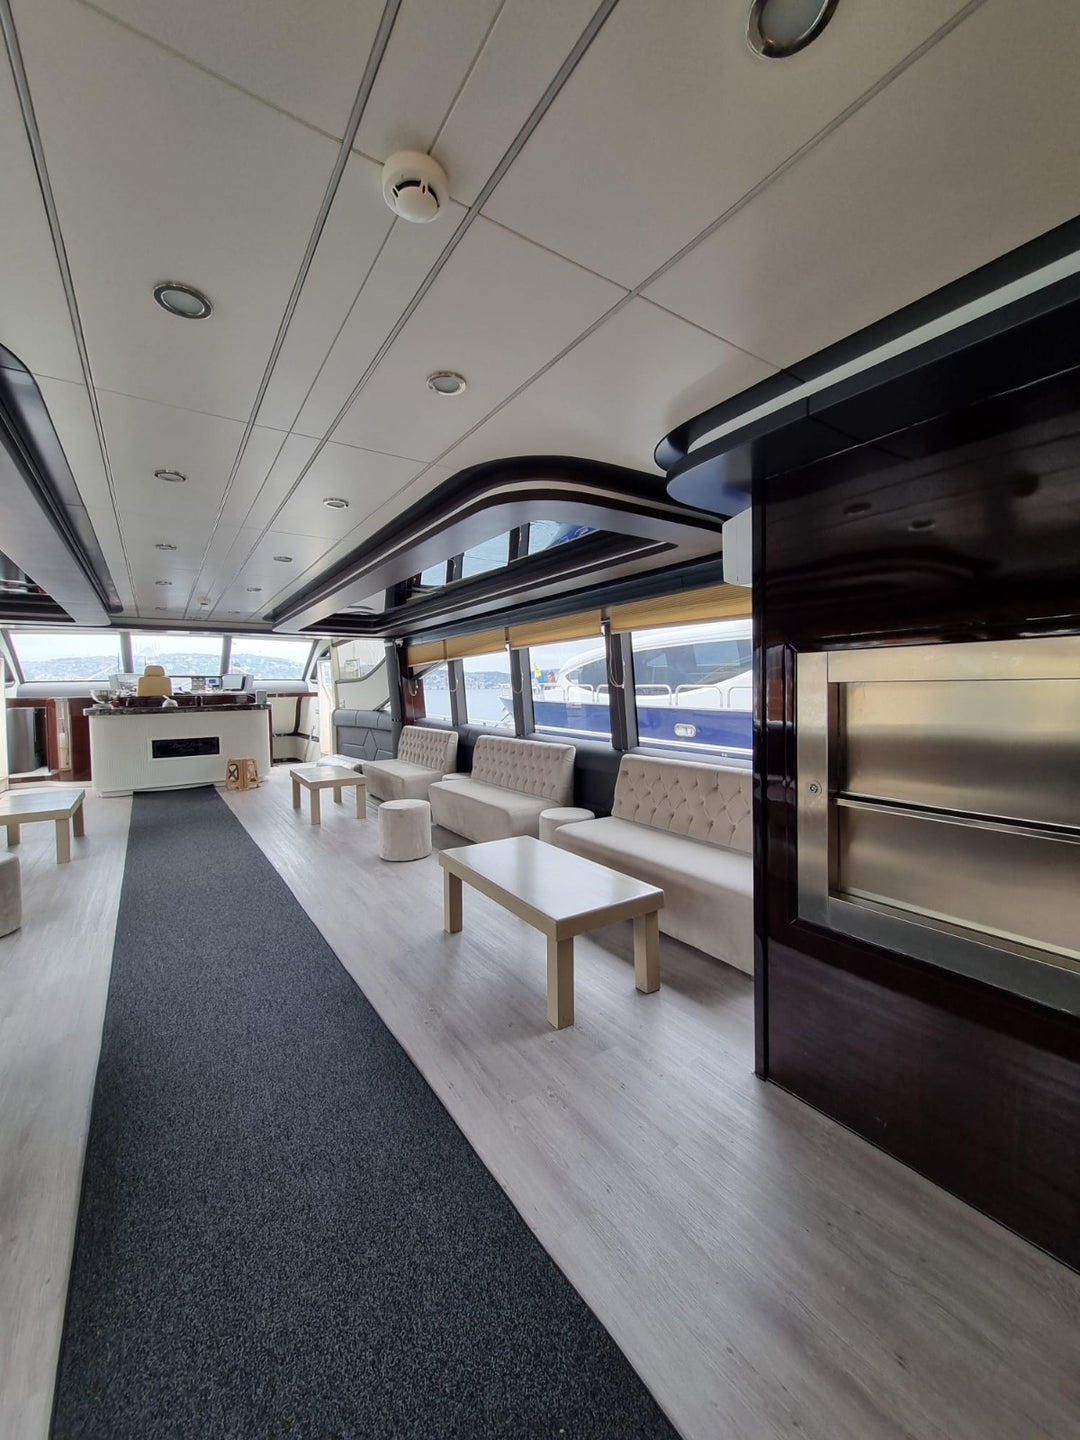 Interior lounge of luxury yacht in Istanbul.